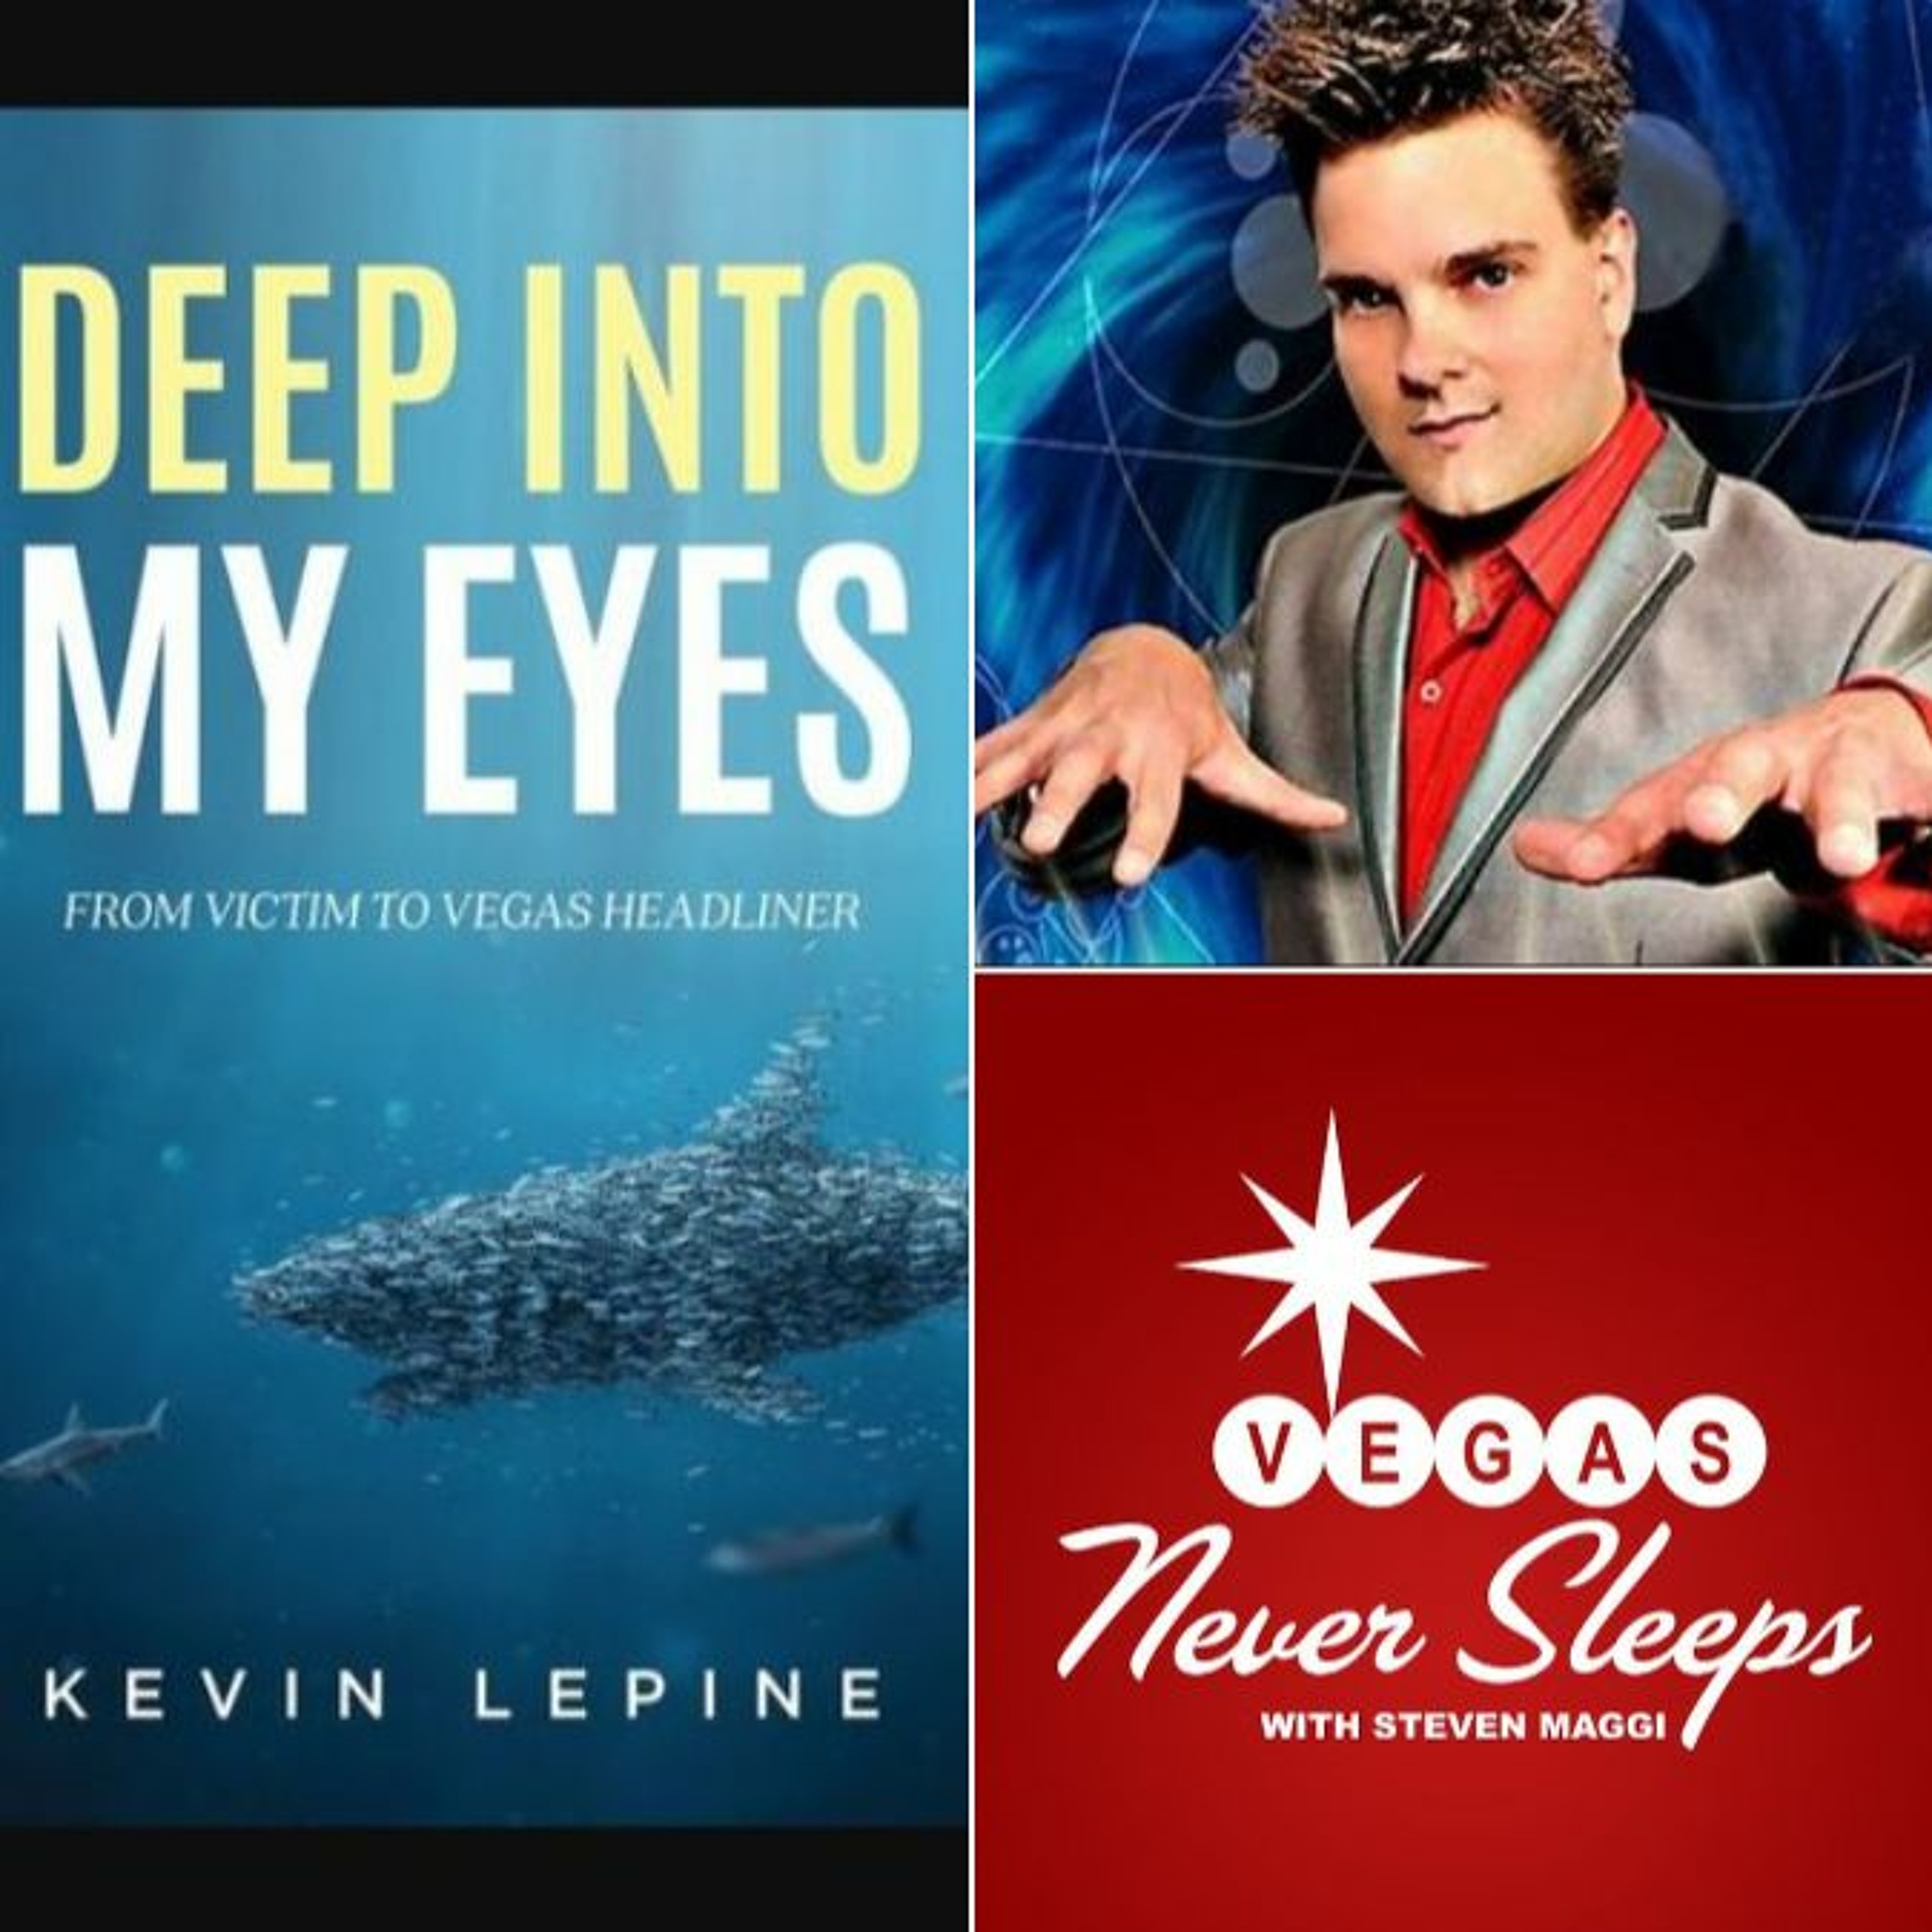 ”Deep Into My Eyes” - The Complete Kevin Lepine Interview